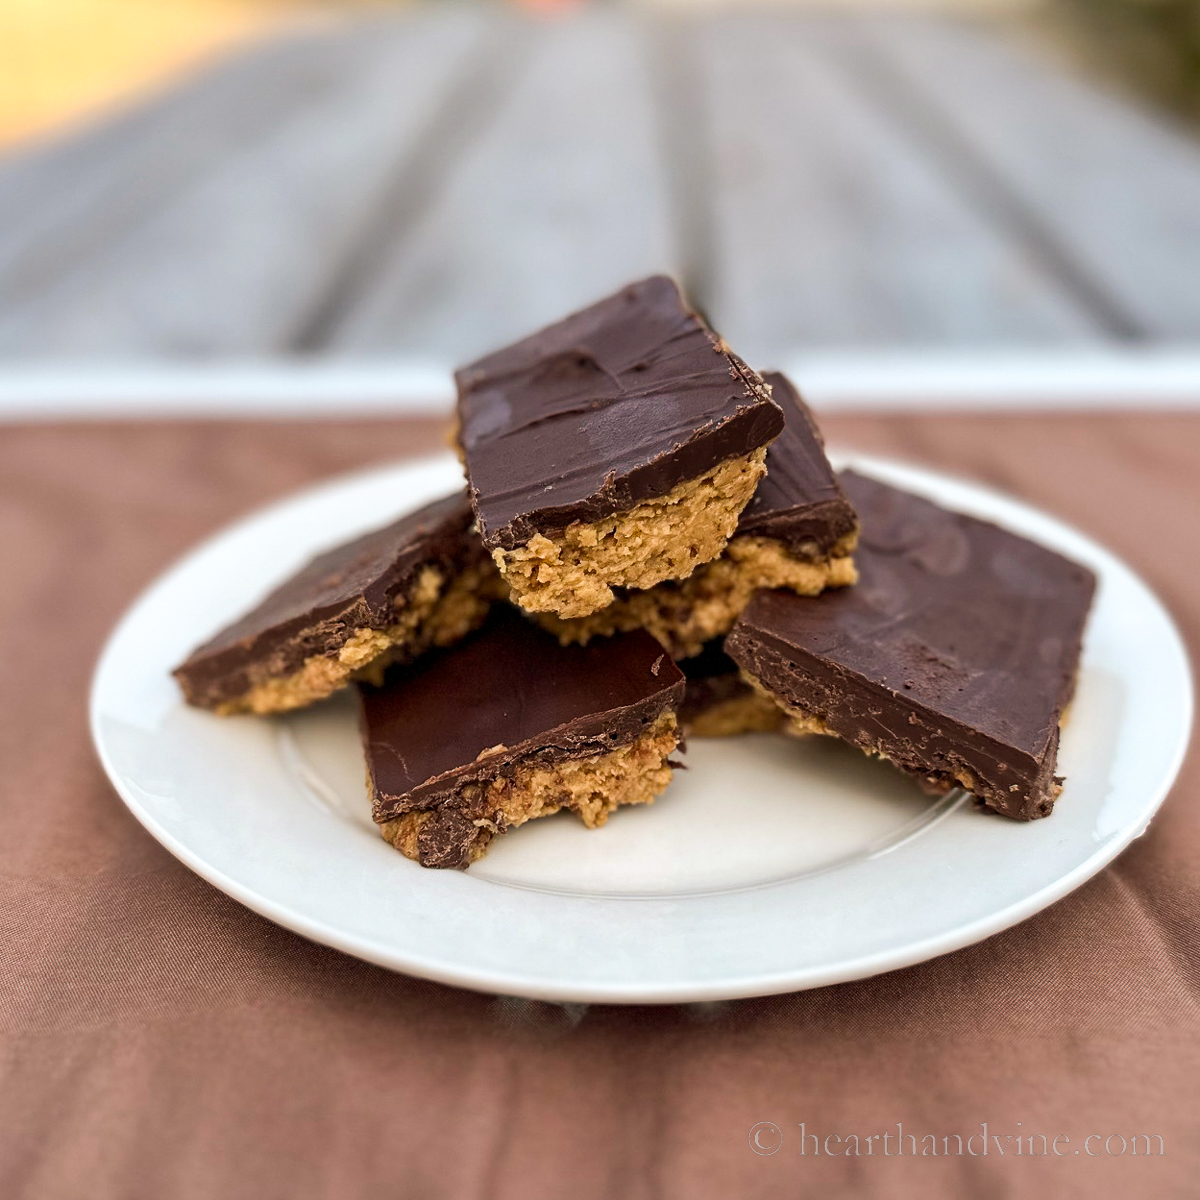 Stacked chocolate peanut butter bars on a plate.